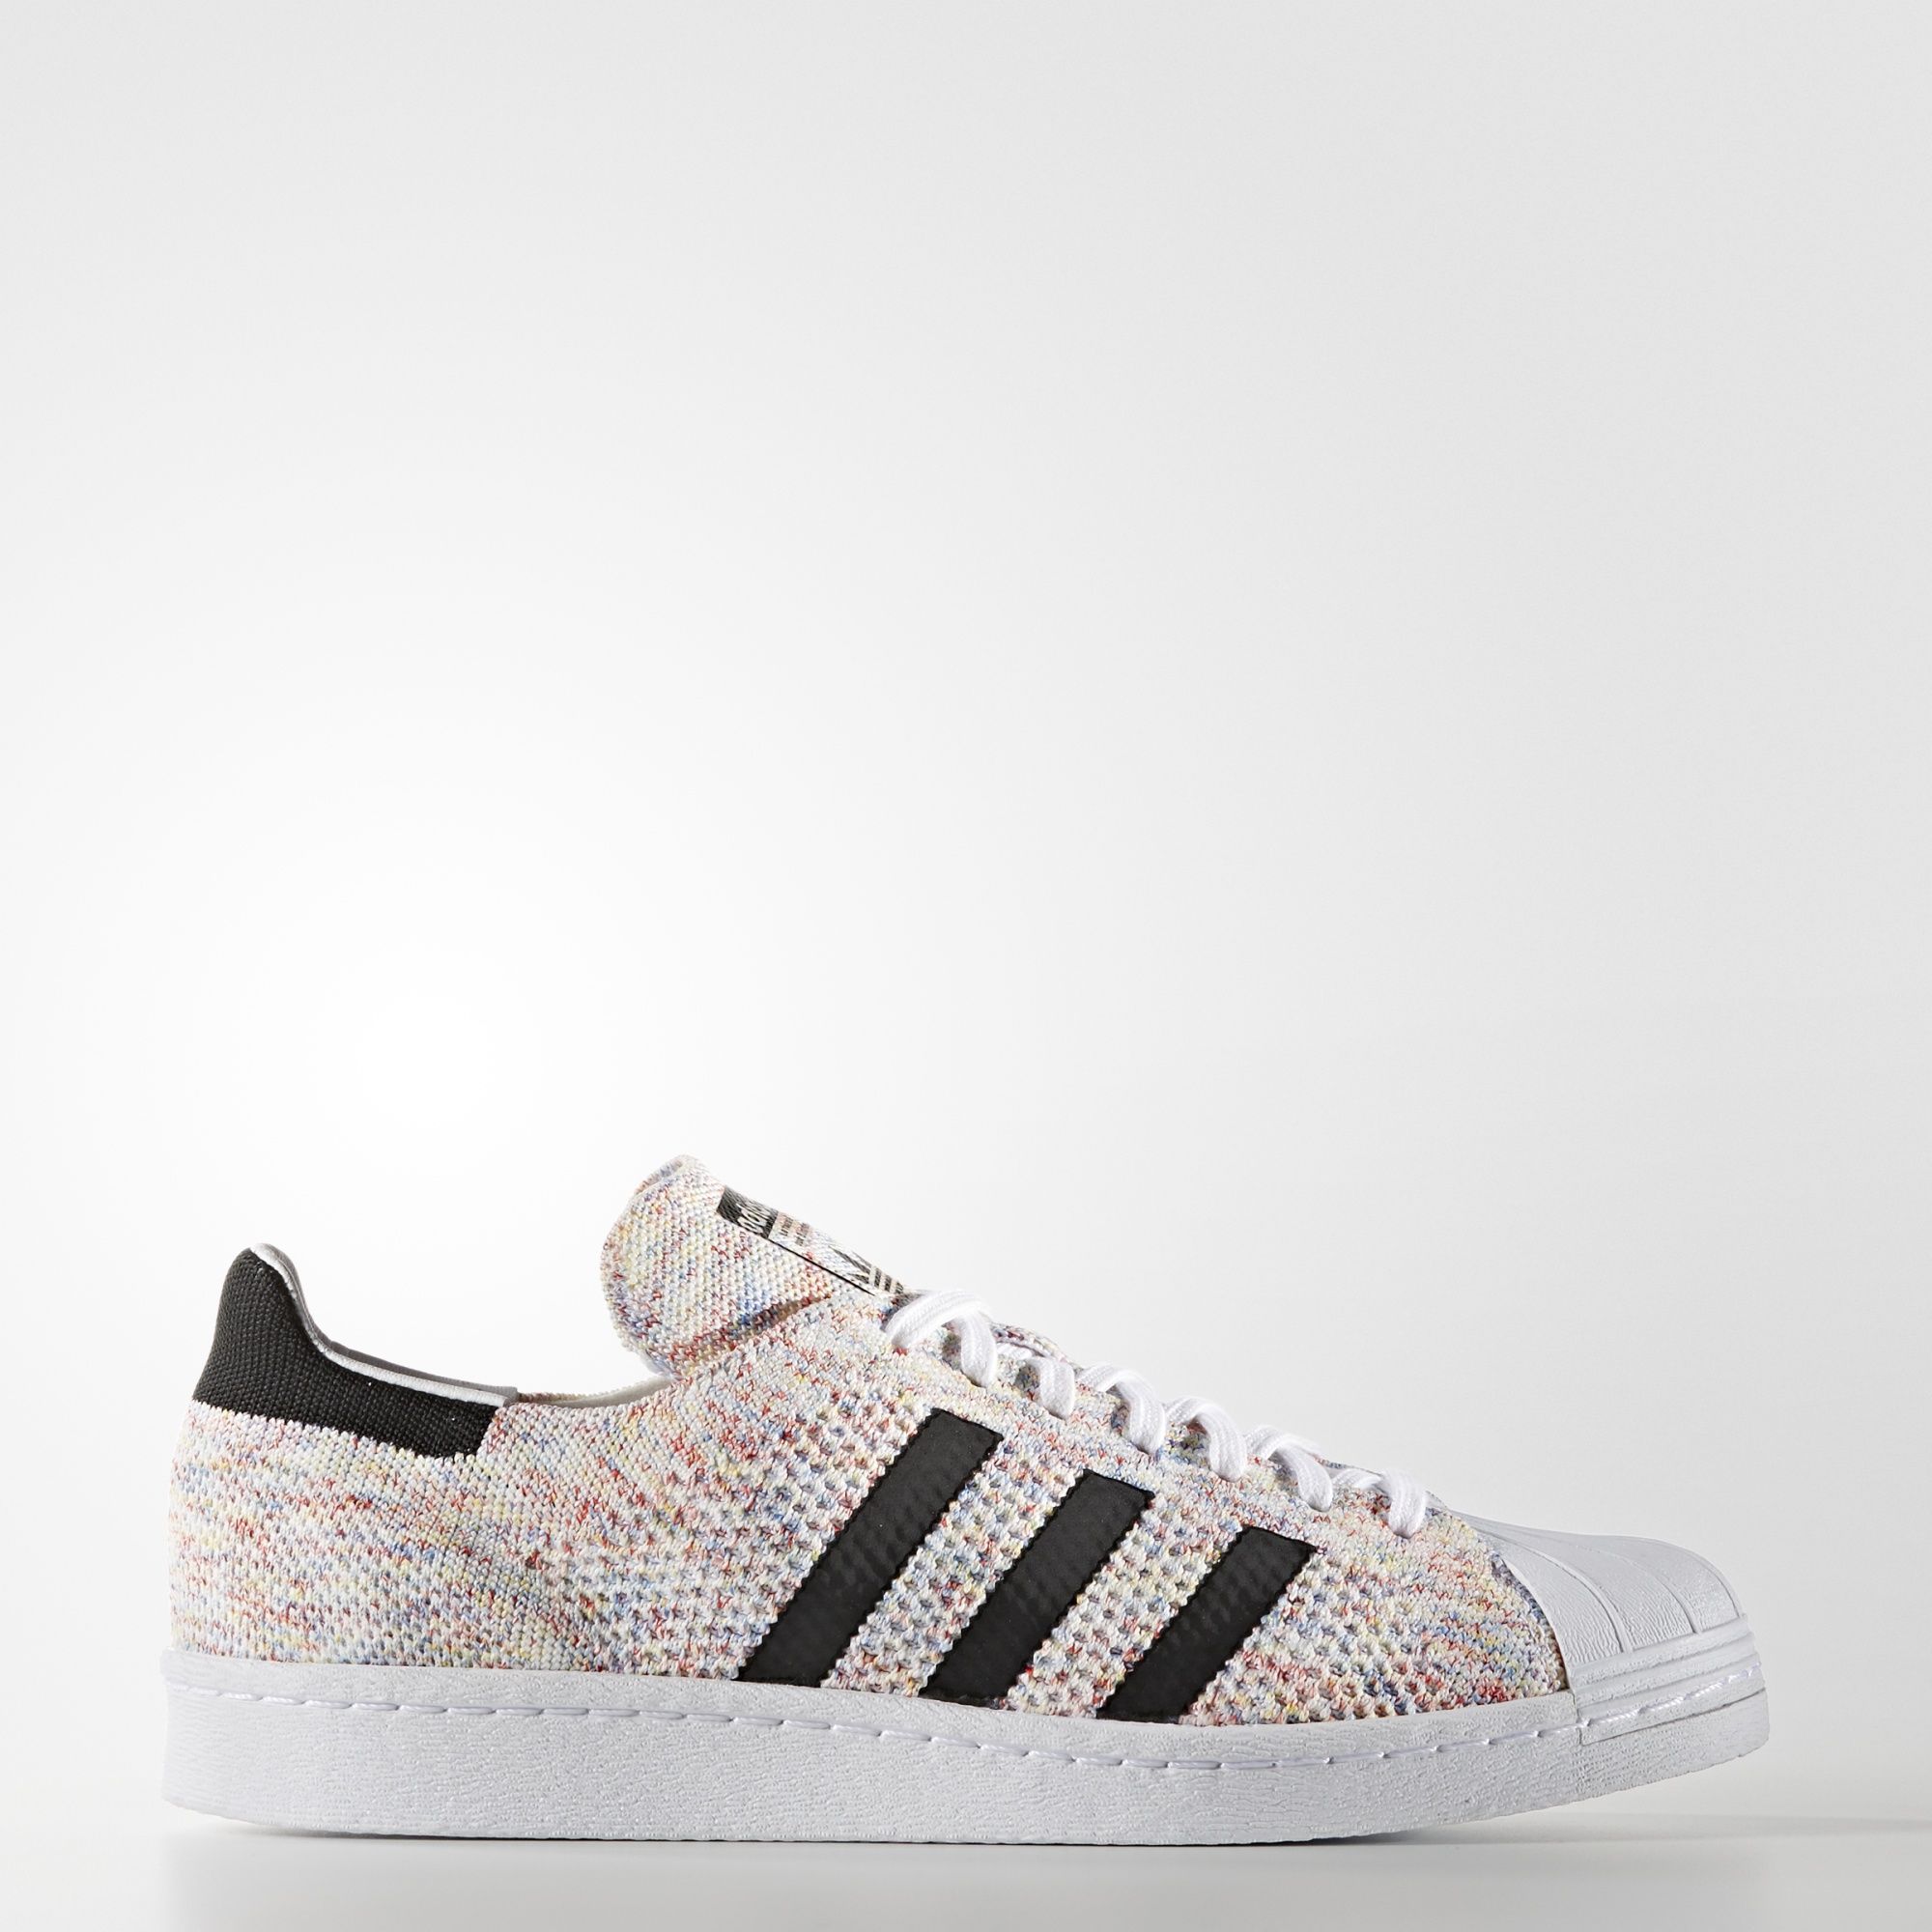 The Superstar 80s is Now Available in Primeknit-9